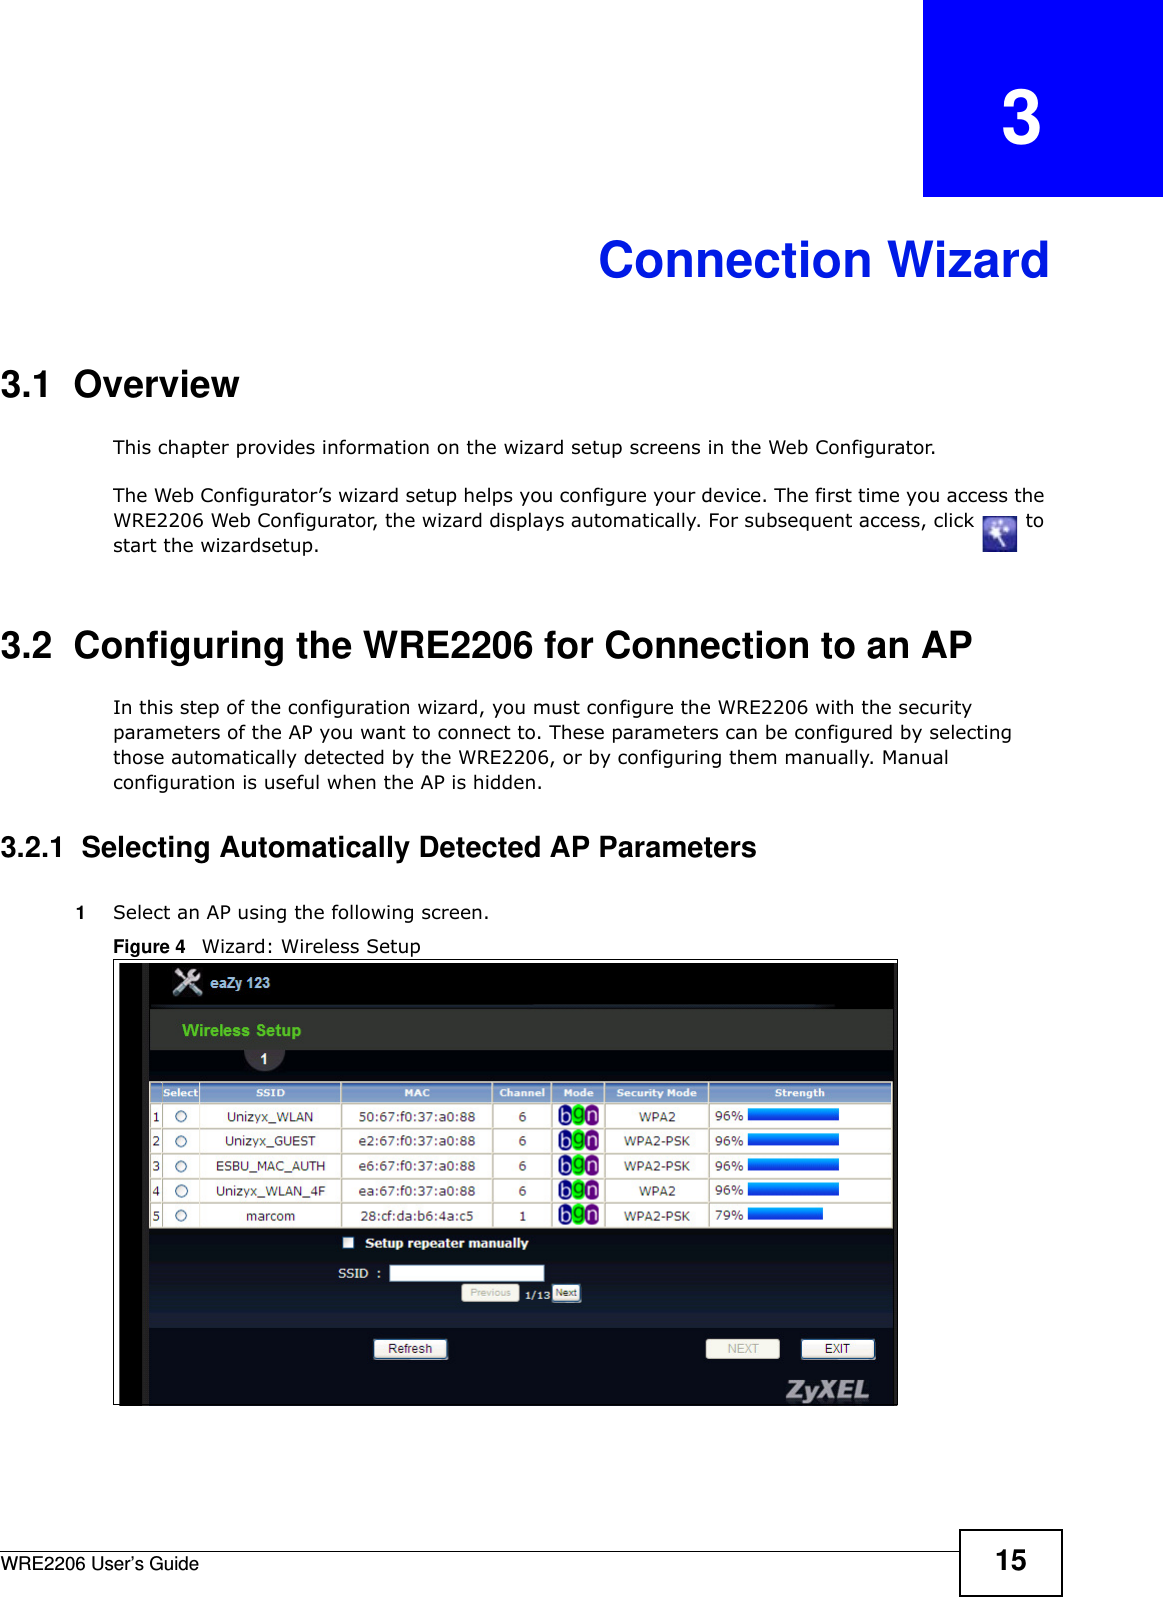 WRE2206 User’s Guide 15CHAPTER   3Connection Wizard3.1  OverviewThis chapter provides information on the wizard setup screens in the Web Configurator.The Web Configurator’s wizard setup helps you configure your device. The first time you access the WRE2206 Web Configurator, the wizard displays automatically. For subsequent access, click   to start the wizardsetup.3.2  Configuring the WRE2206 for Connection to an APIn this step of the configuration wizard, you must configure the WRE2206 with the security parameters of the AP you want to connect to. These parameters can be configured by selecting those automatically detected by the WRE2206, or by configuring them manually. Manual configuration is useful when the AP is hidden.3.2.1  Selecting Automatically Detected AP Parameters1Select an AP using the following screen.Figure 4   Wizard: Wireless Setup